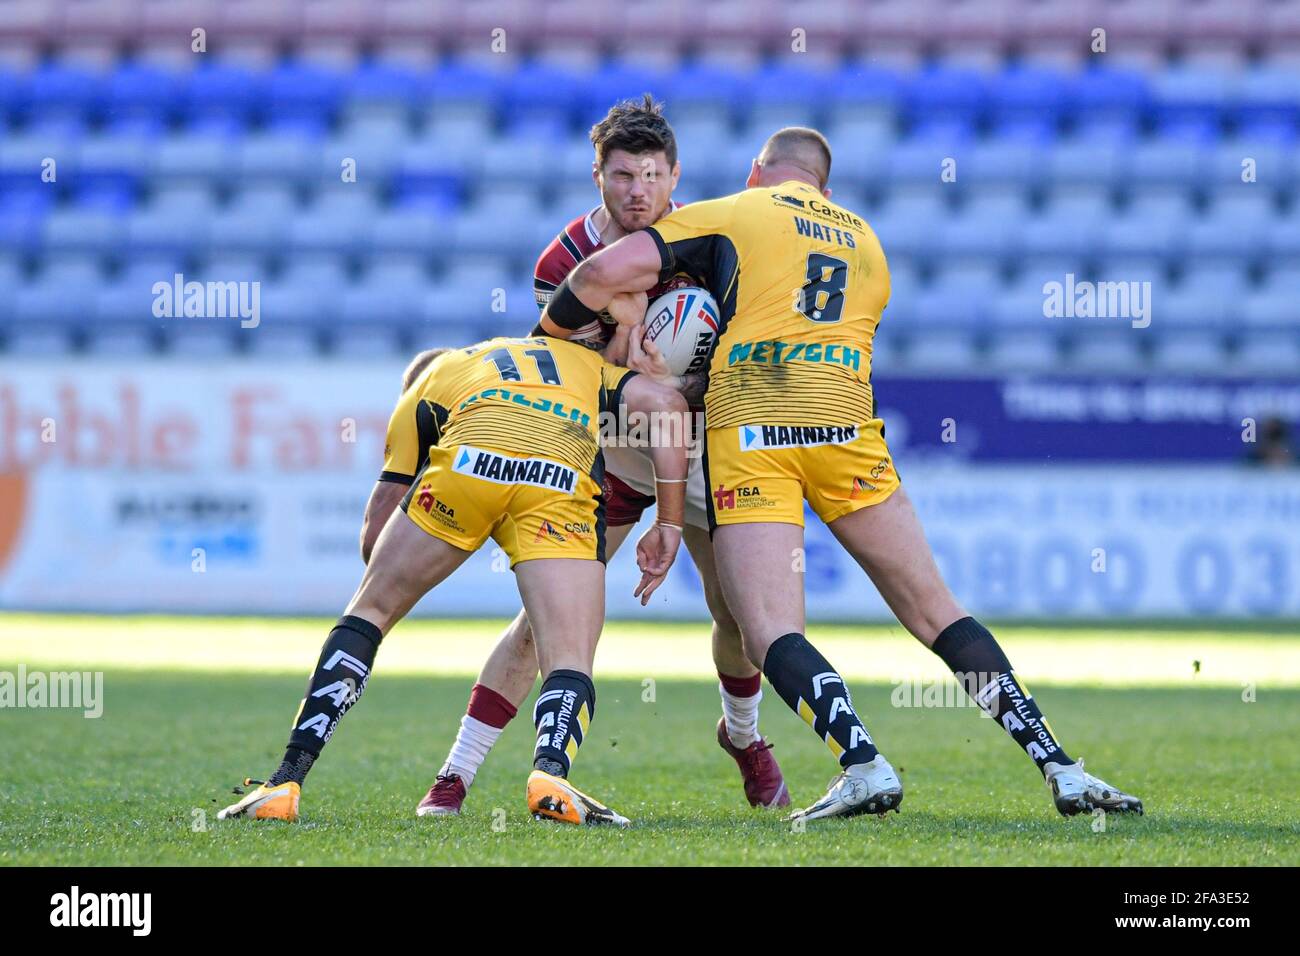 Wigan, UK. 22nd Apr, 2021. John Bateman (13) of Wigan Warriors is tackled by Liam Watts (8) of Castleford Tigers and Oliver Holmes (11) of Castleford Tigers in Wigan, United Kingdom on 4/22/2021. (Photo by Simon Whitehead/News Images/Sipa USA) Credit: Sipa USA/Alamy Live News Stock Photo